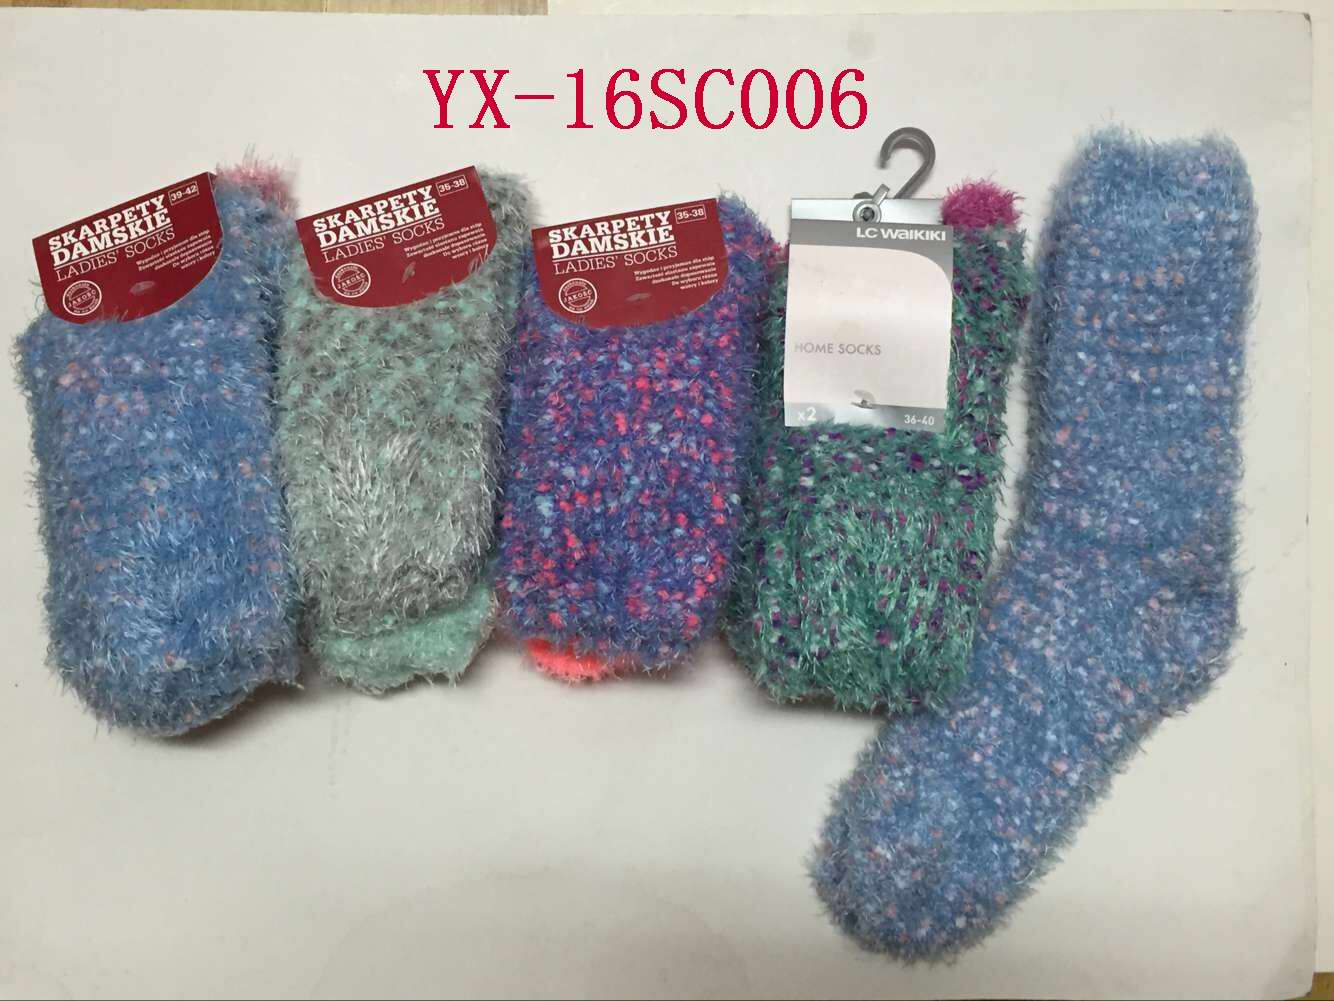 <img src='../manage/Upload/Pic/2016125141554451.jpg' width='400' style='border:3px solid #EEEEEE;'><div align=center>Name:HOME SOCKS,No.:6010395,Price:0 元</div>